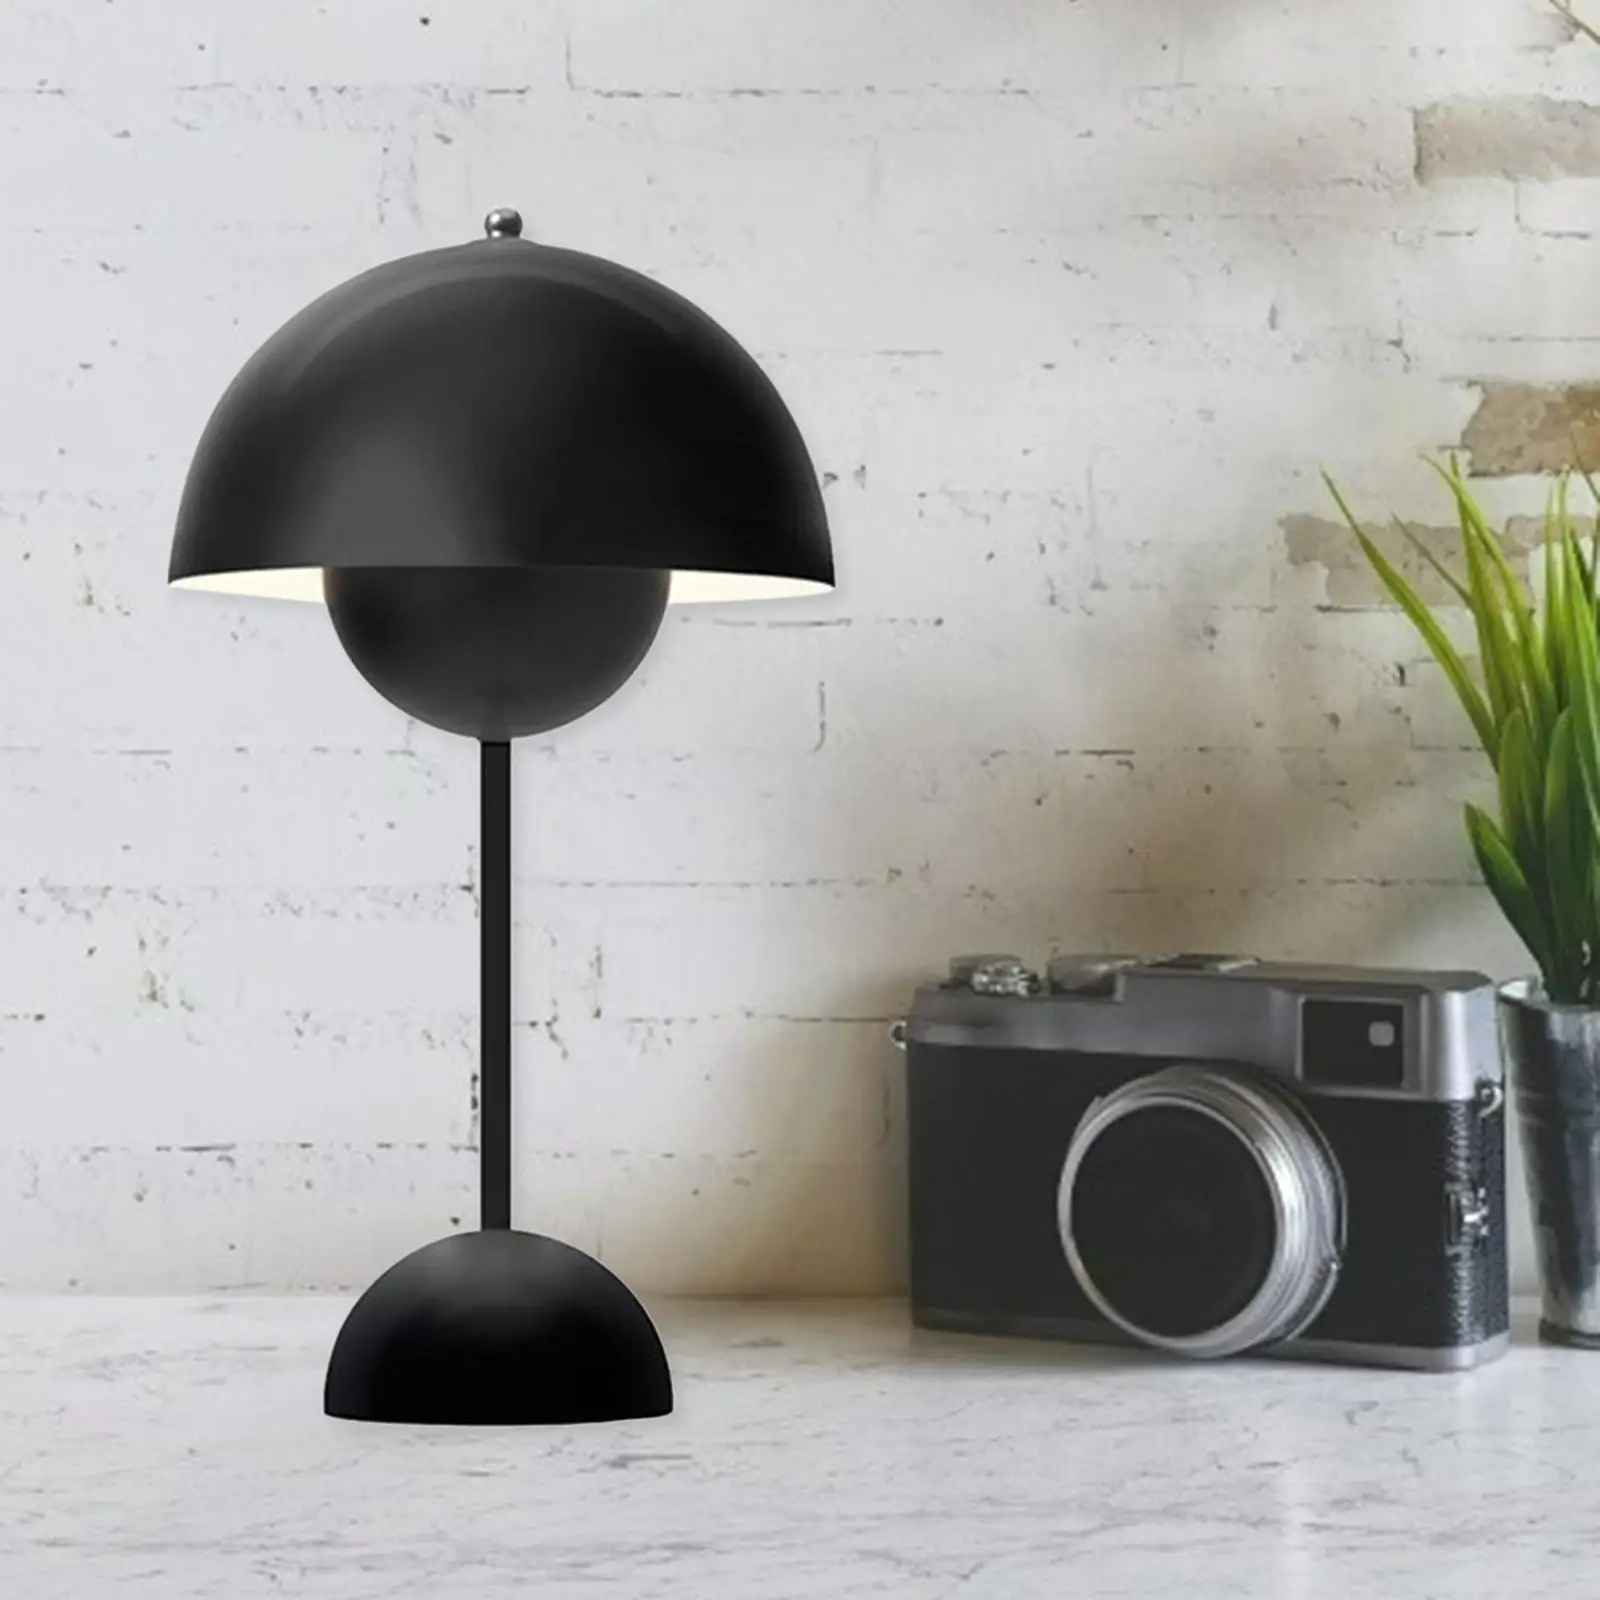 Modern Simplicity Bedside Light Decorative Eye  Creative Fashion  for Table Study Room Bedroom Home